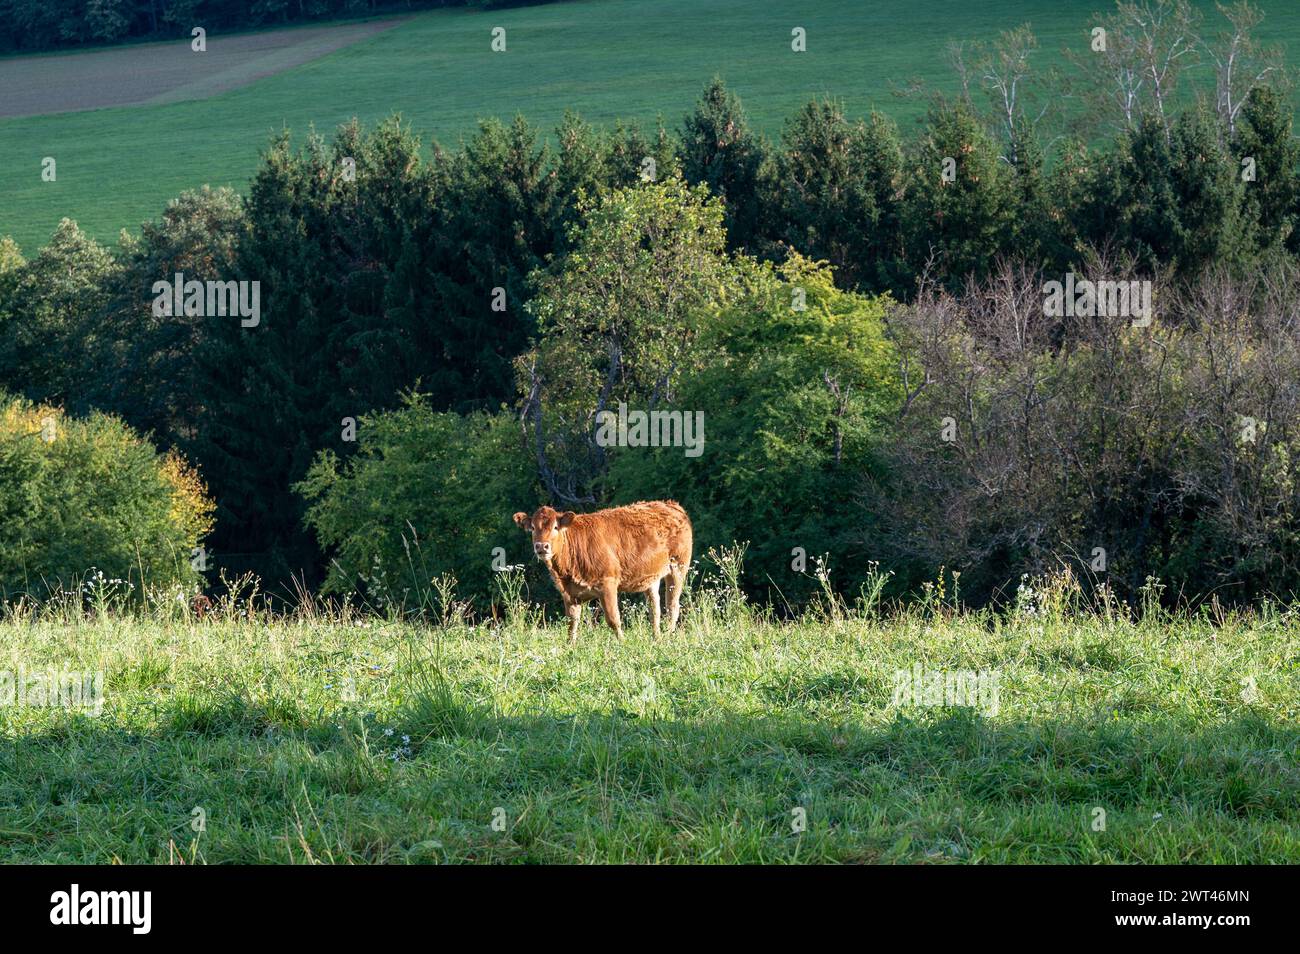 A brown cow grazing in a pasture in green nature Stock Photo